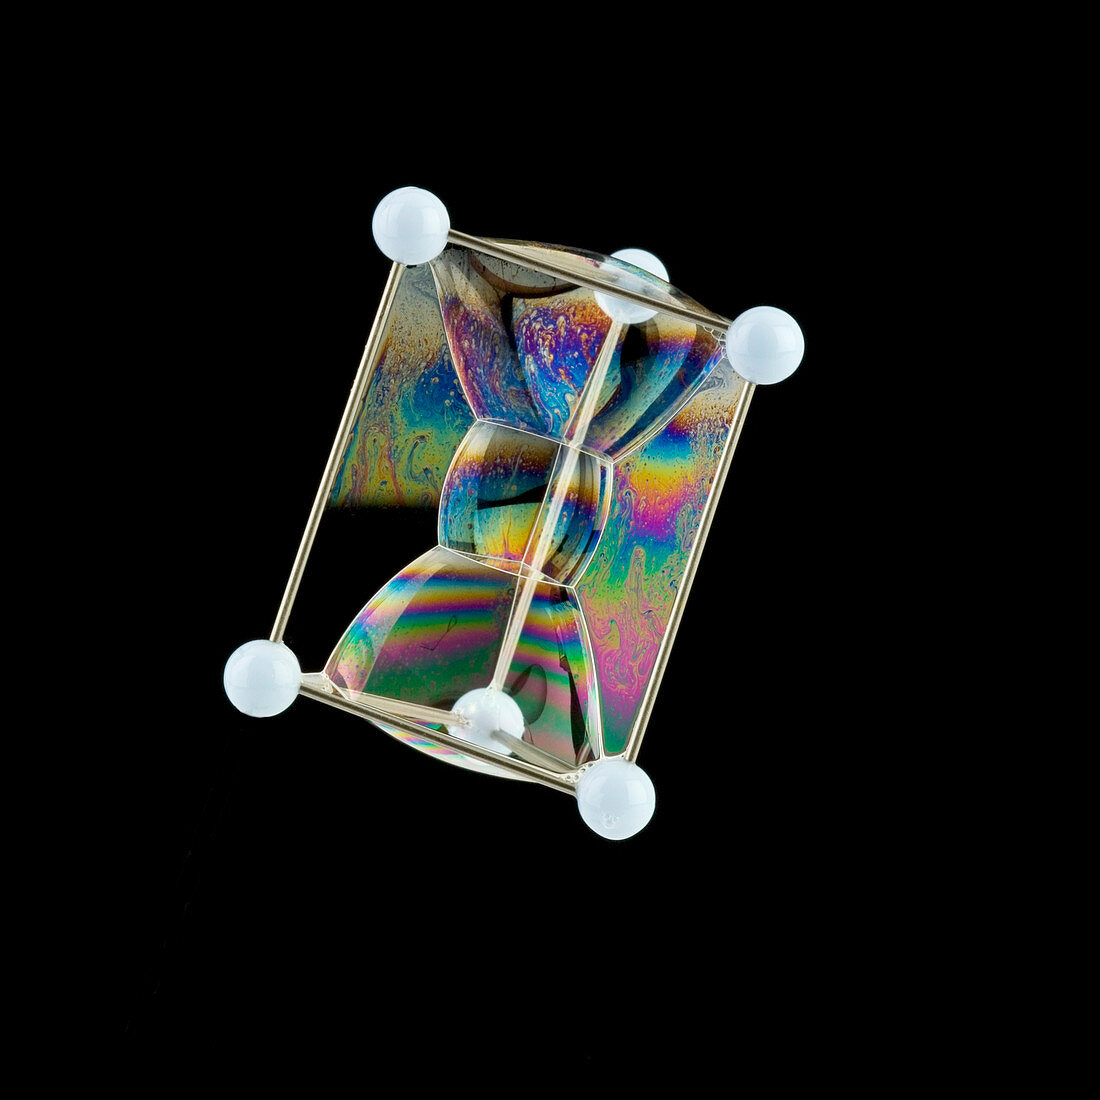 Soap bubbles on a triangular prism frame